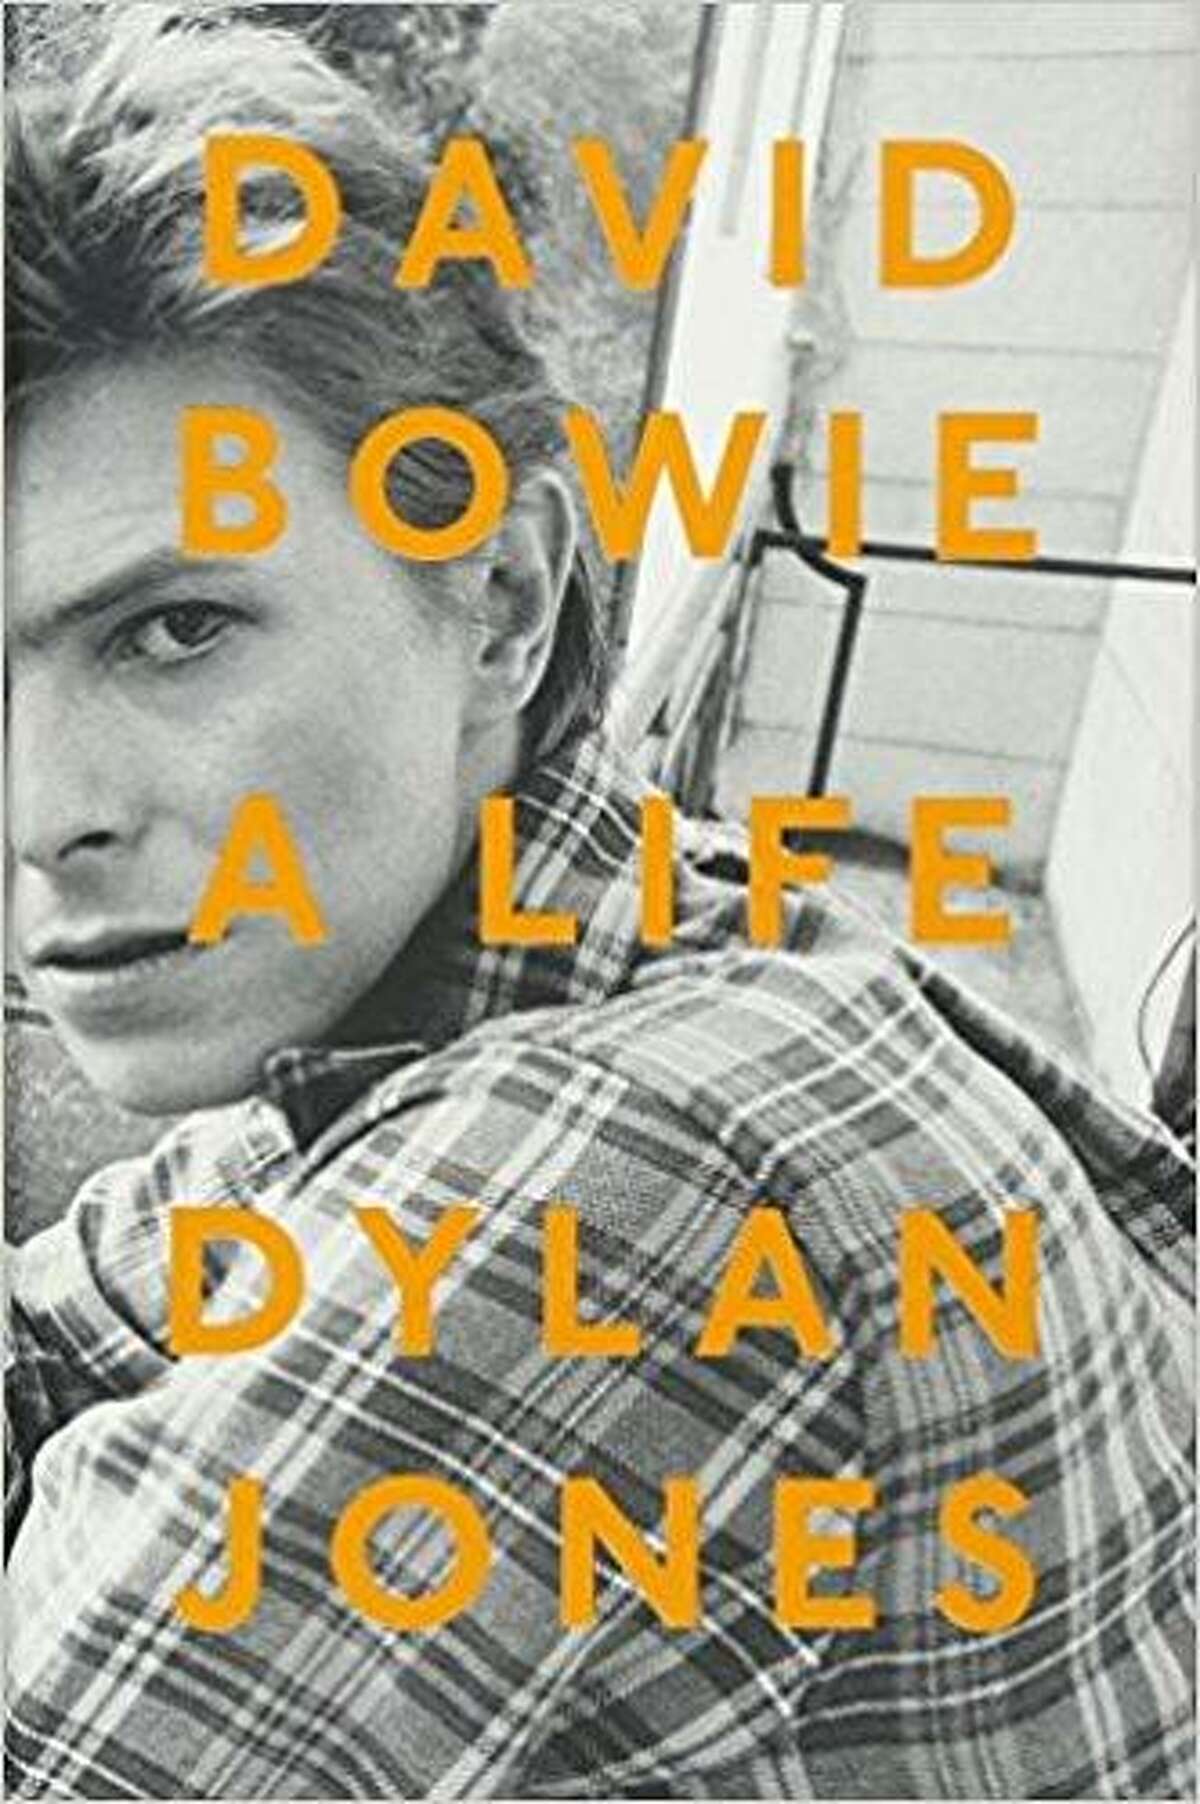 “David Bowie: A Life” by Dylan Jones